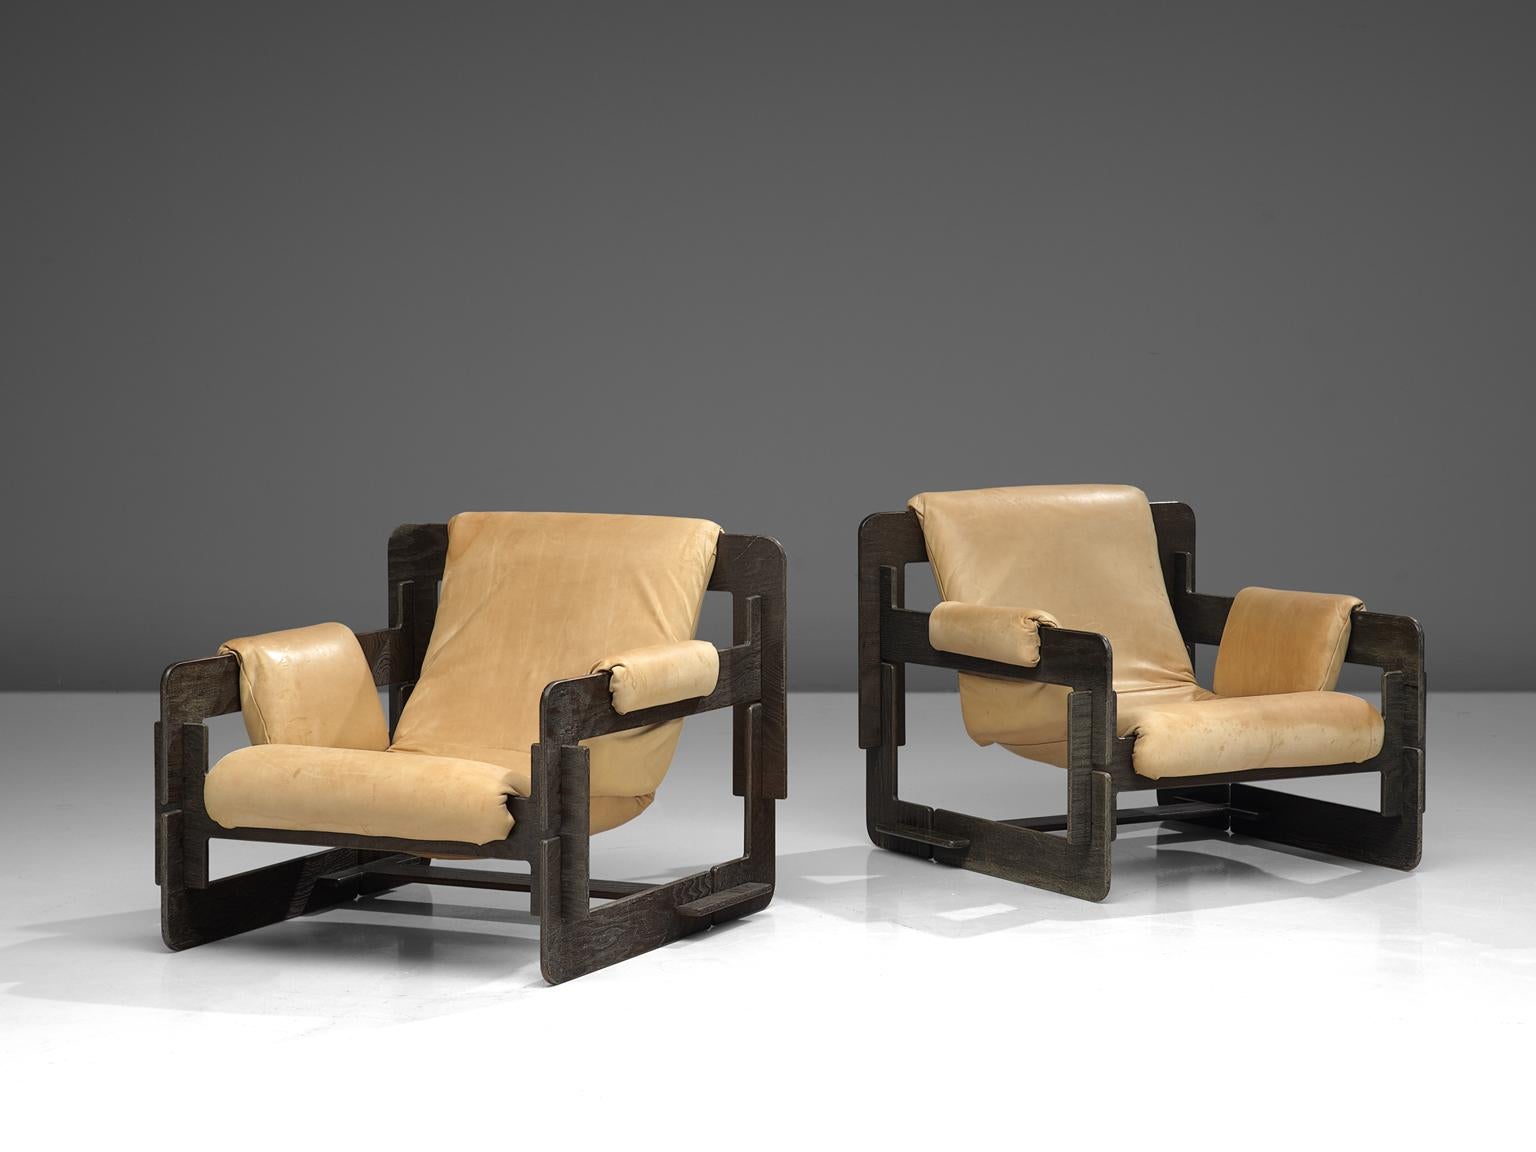 Arne Jacobsen for Fritz Hansen, pair of lounge chairs, plywood and leather, Denmark, 1960.

This sturdy pair of lounge chairs, designed by Arne Jacobsen, are made in leather and darkened plywood. The seat is floating, thanks to the inventive wooden